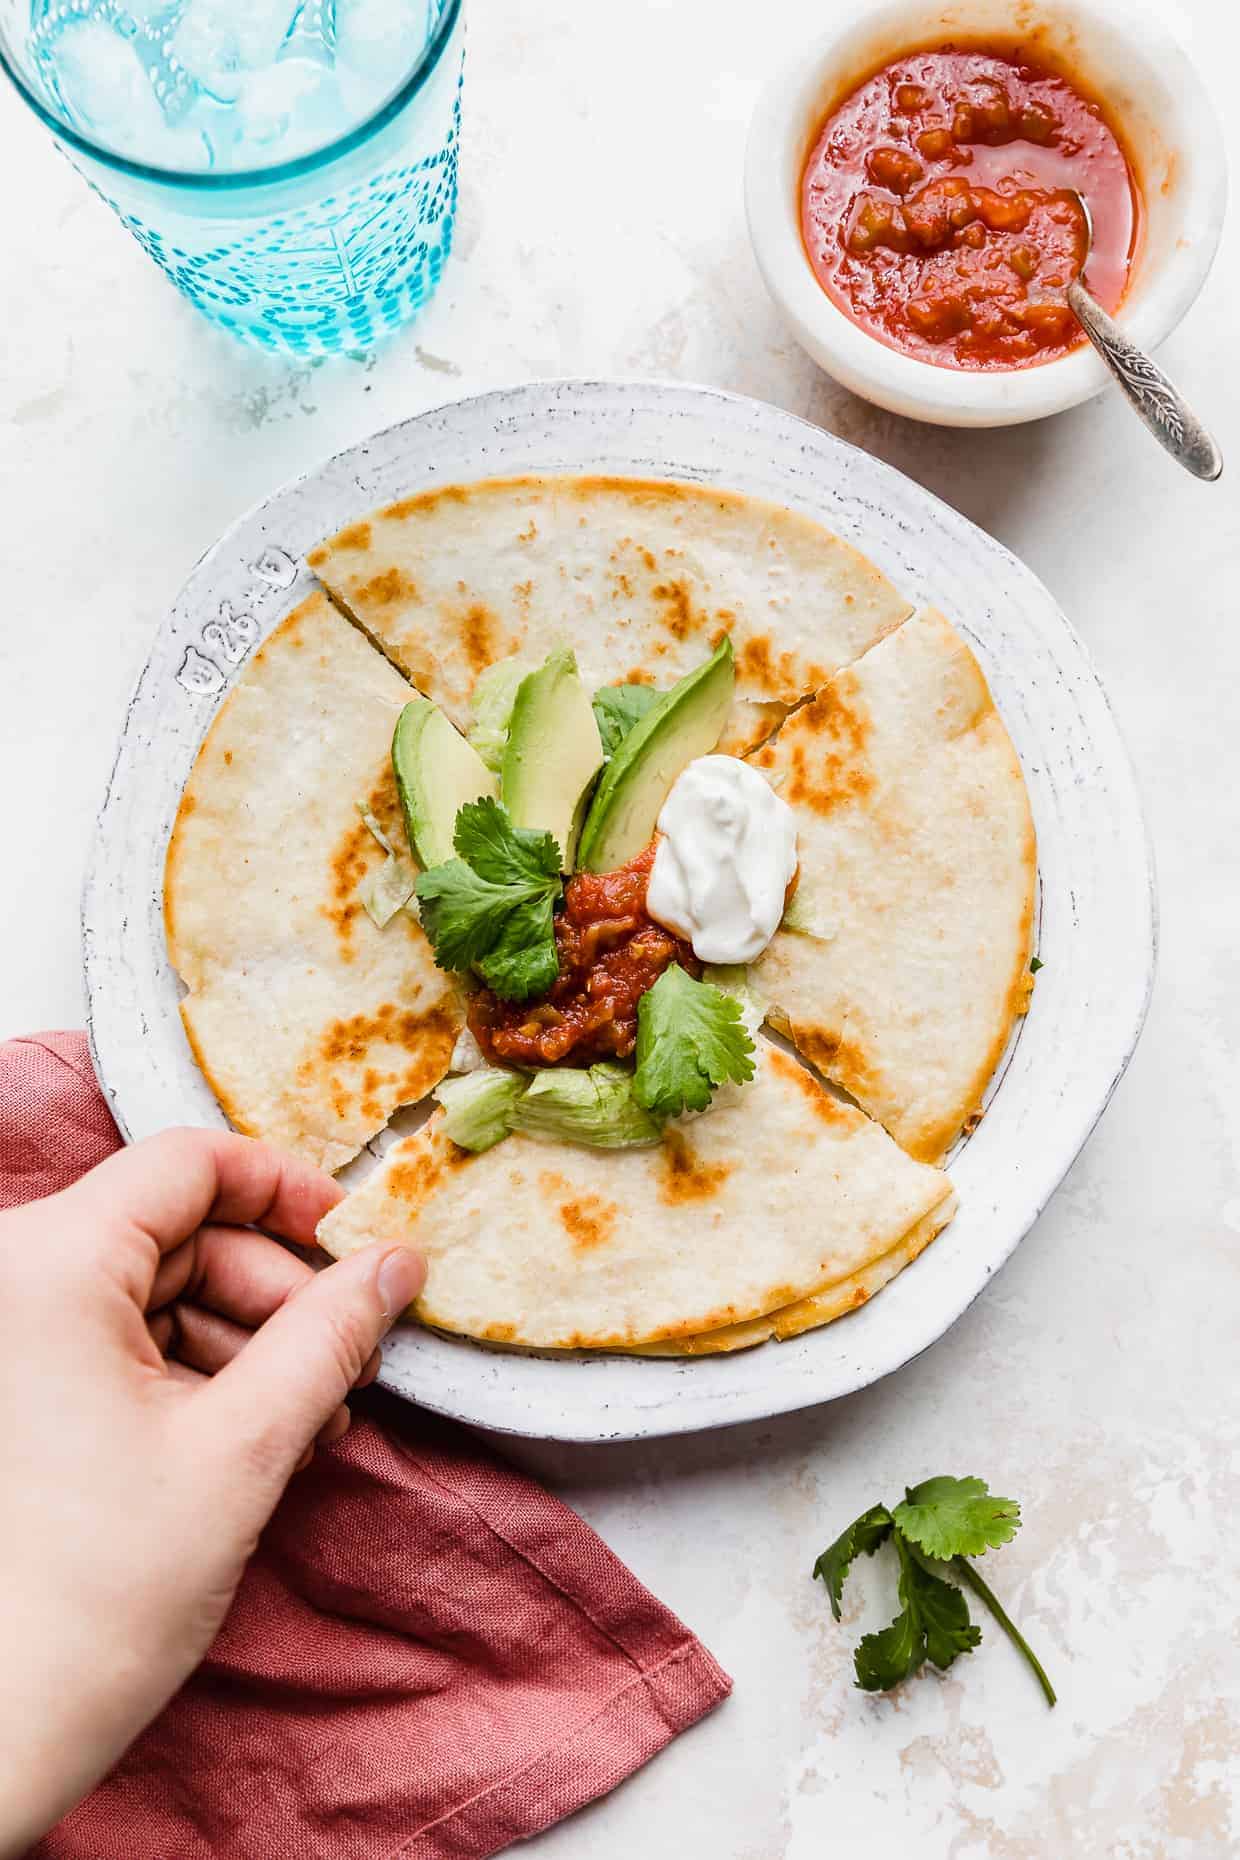 A hand grabbing a slice of a golden brown cheese quesadilla on a white plate that has been topped with avocado, sour cream, and salsa.